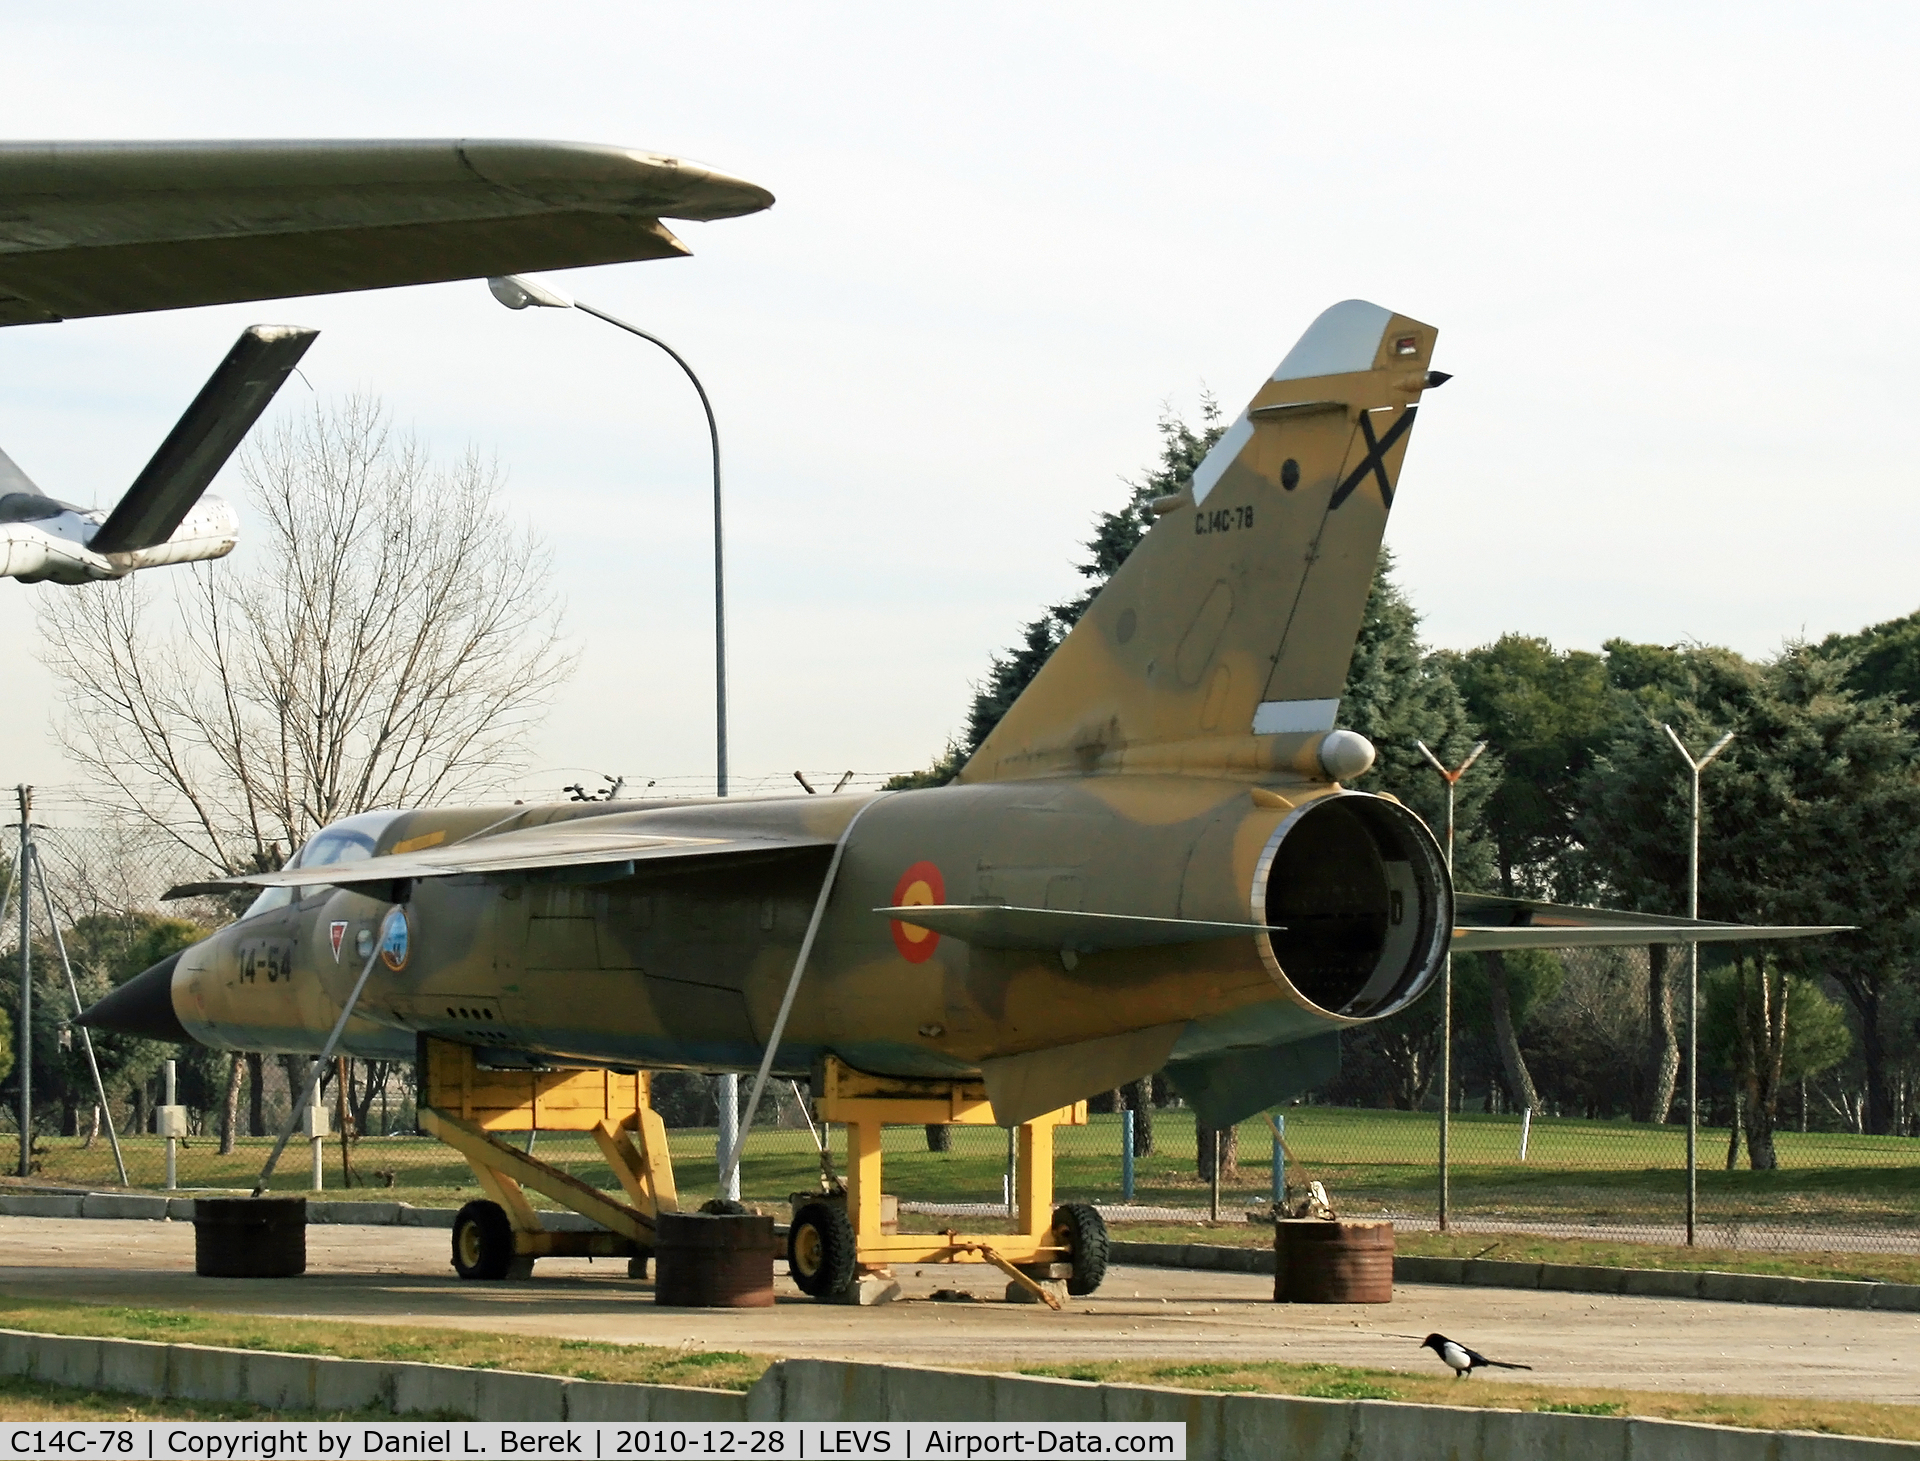 C14C-78, Dassault Mirage F.1EDA C/N 567, With Spanish Air Force Number 14-54; also flew with Number 11-05.  Purchased from the Qatar Air Force, QA76-F.  Now at Museo del Aire, awaiting display.